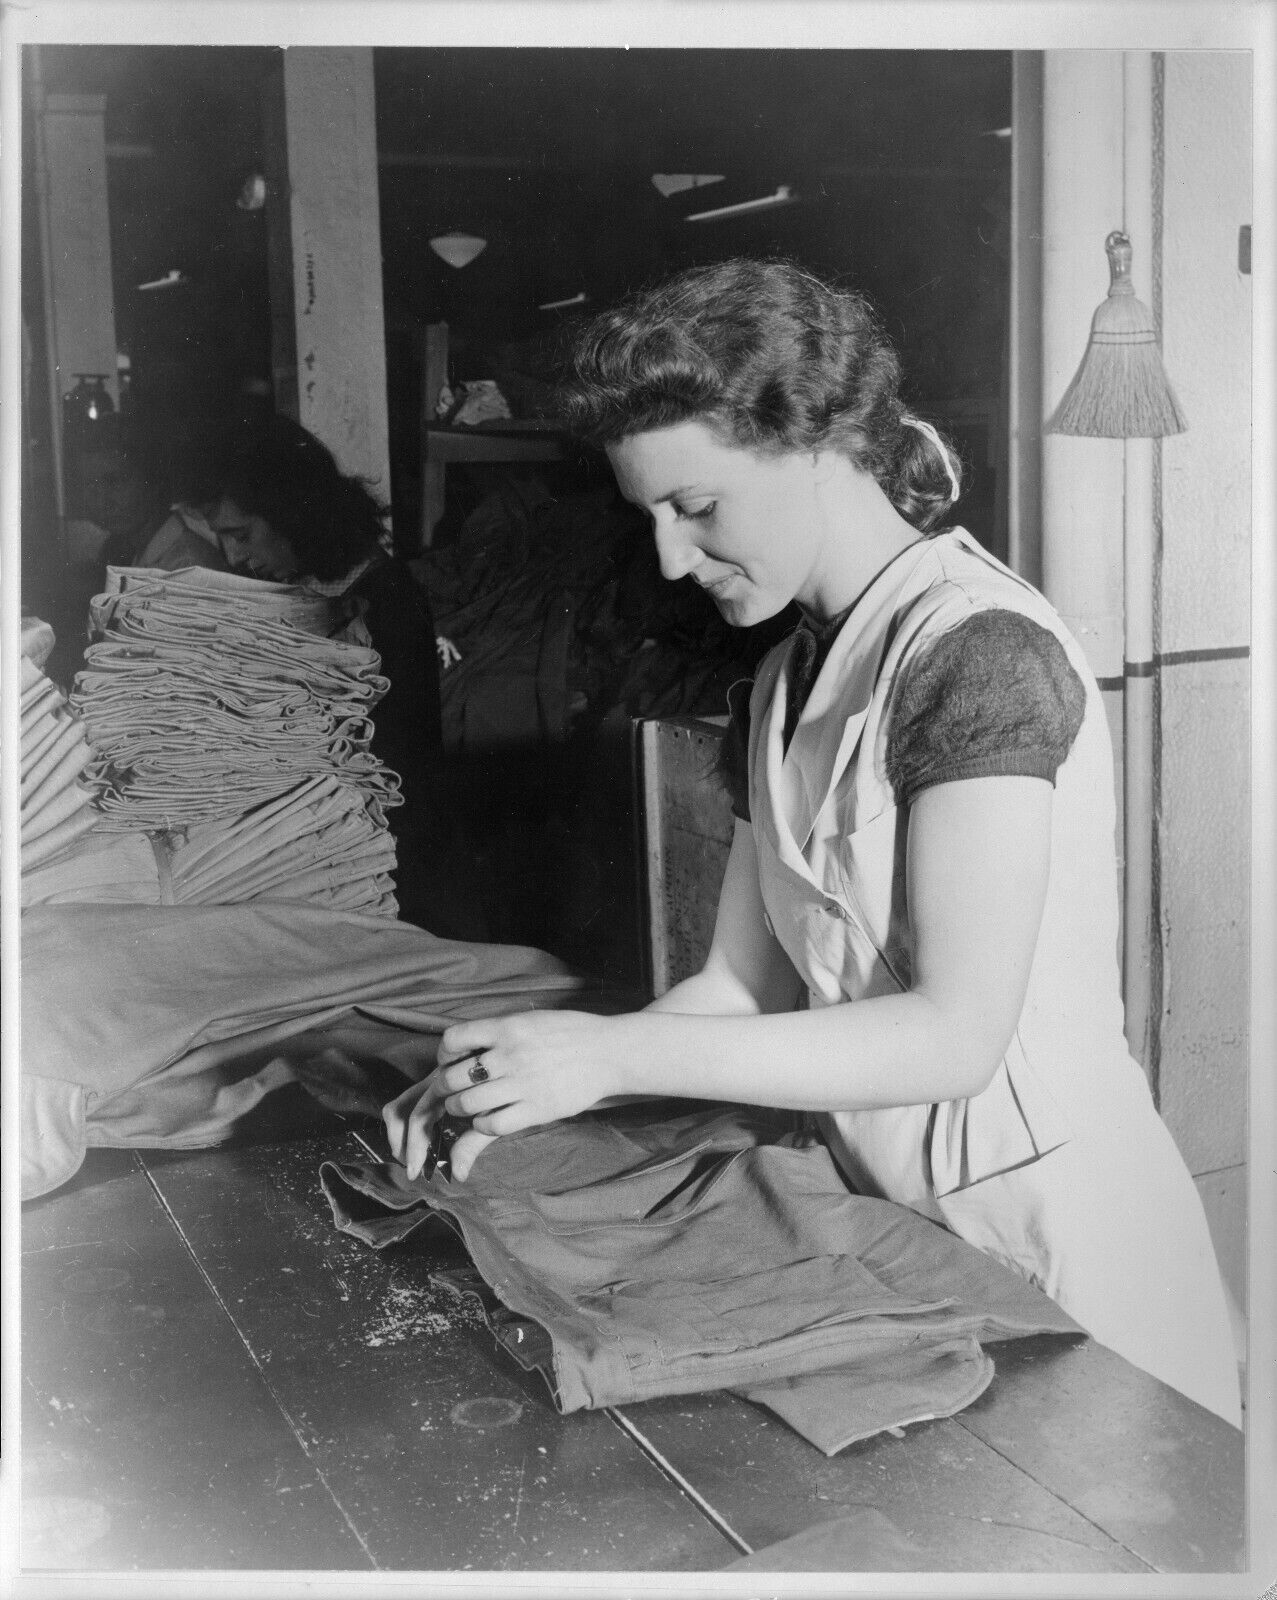 WW1 War Time 8x10 Photo Woman Examiner clipping threads from finished uniforms